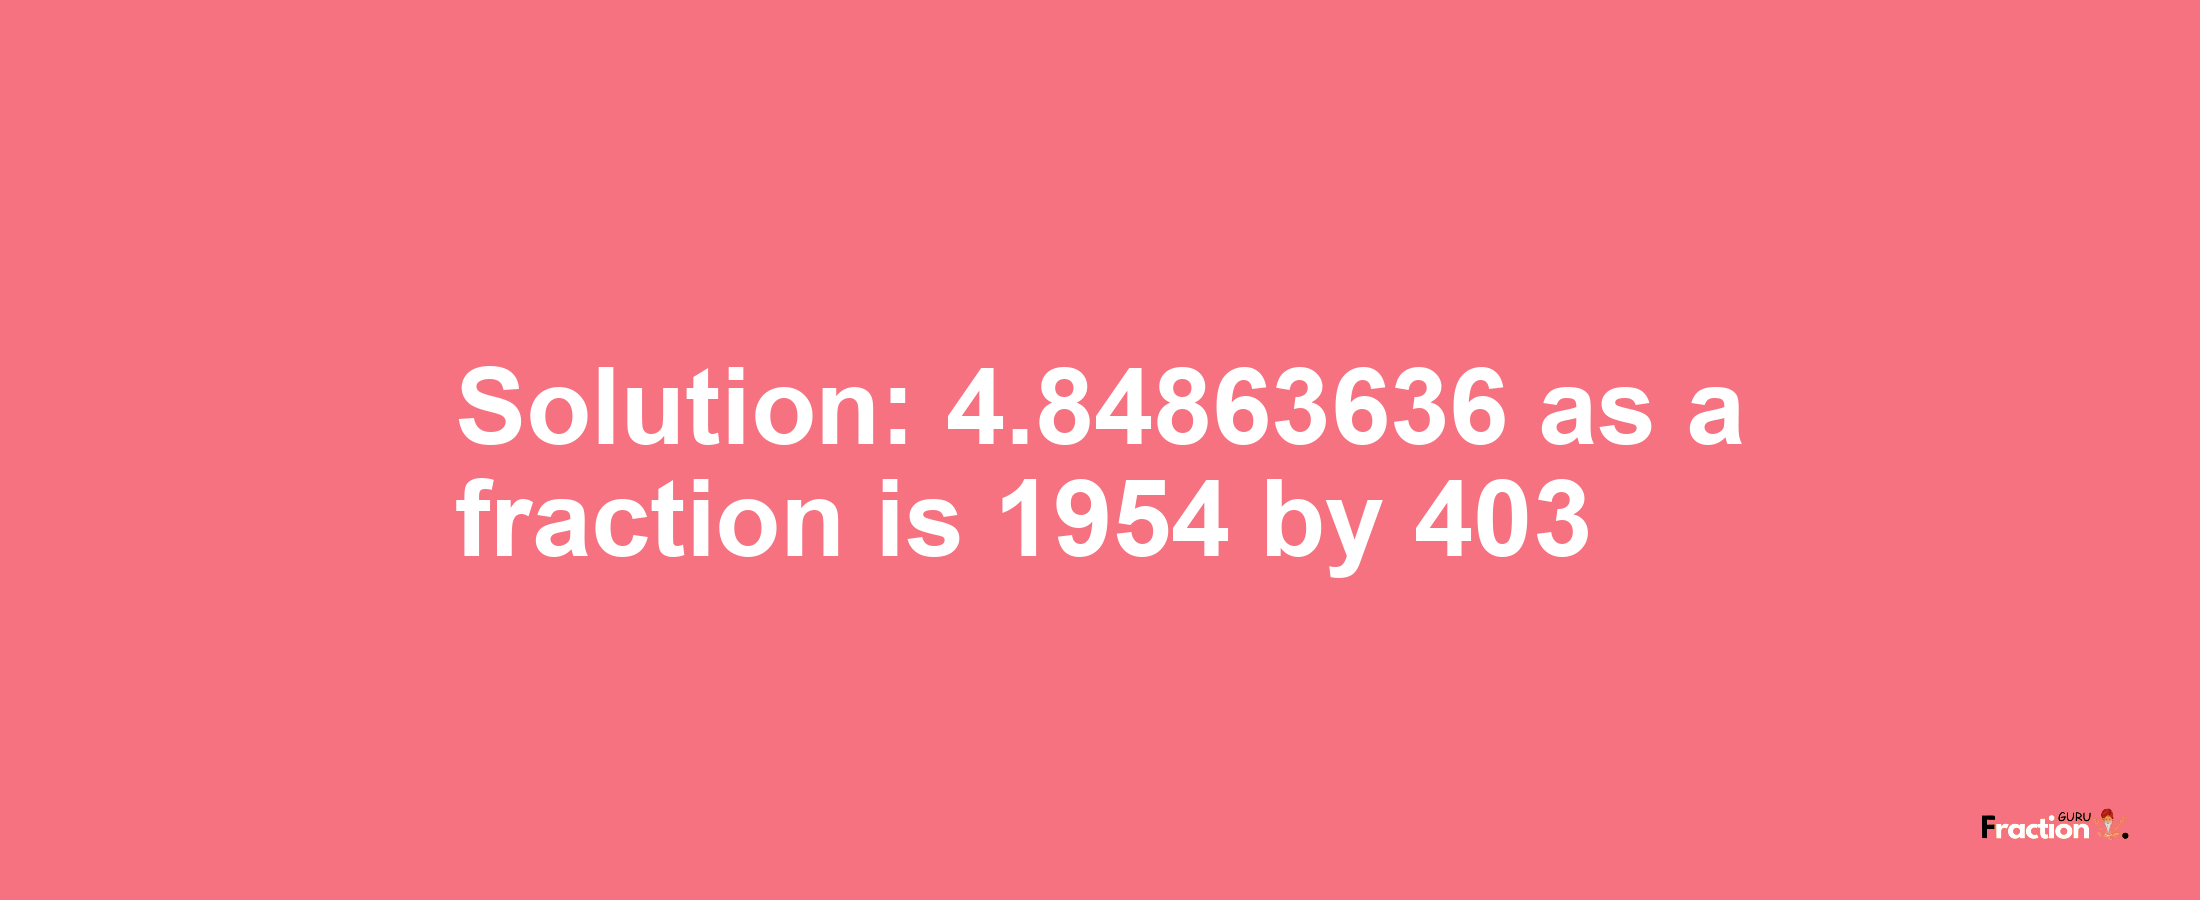 Solution:4.84863636 as a fraction is 1954/403